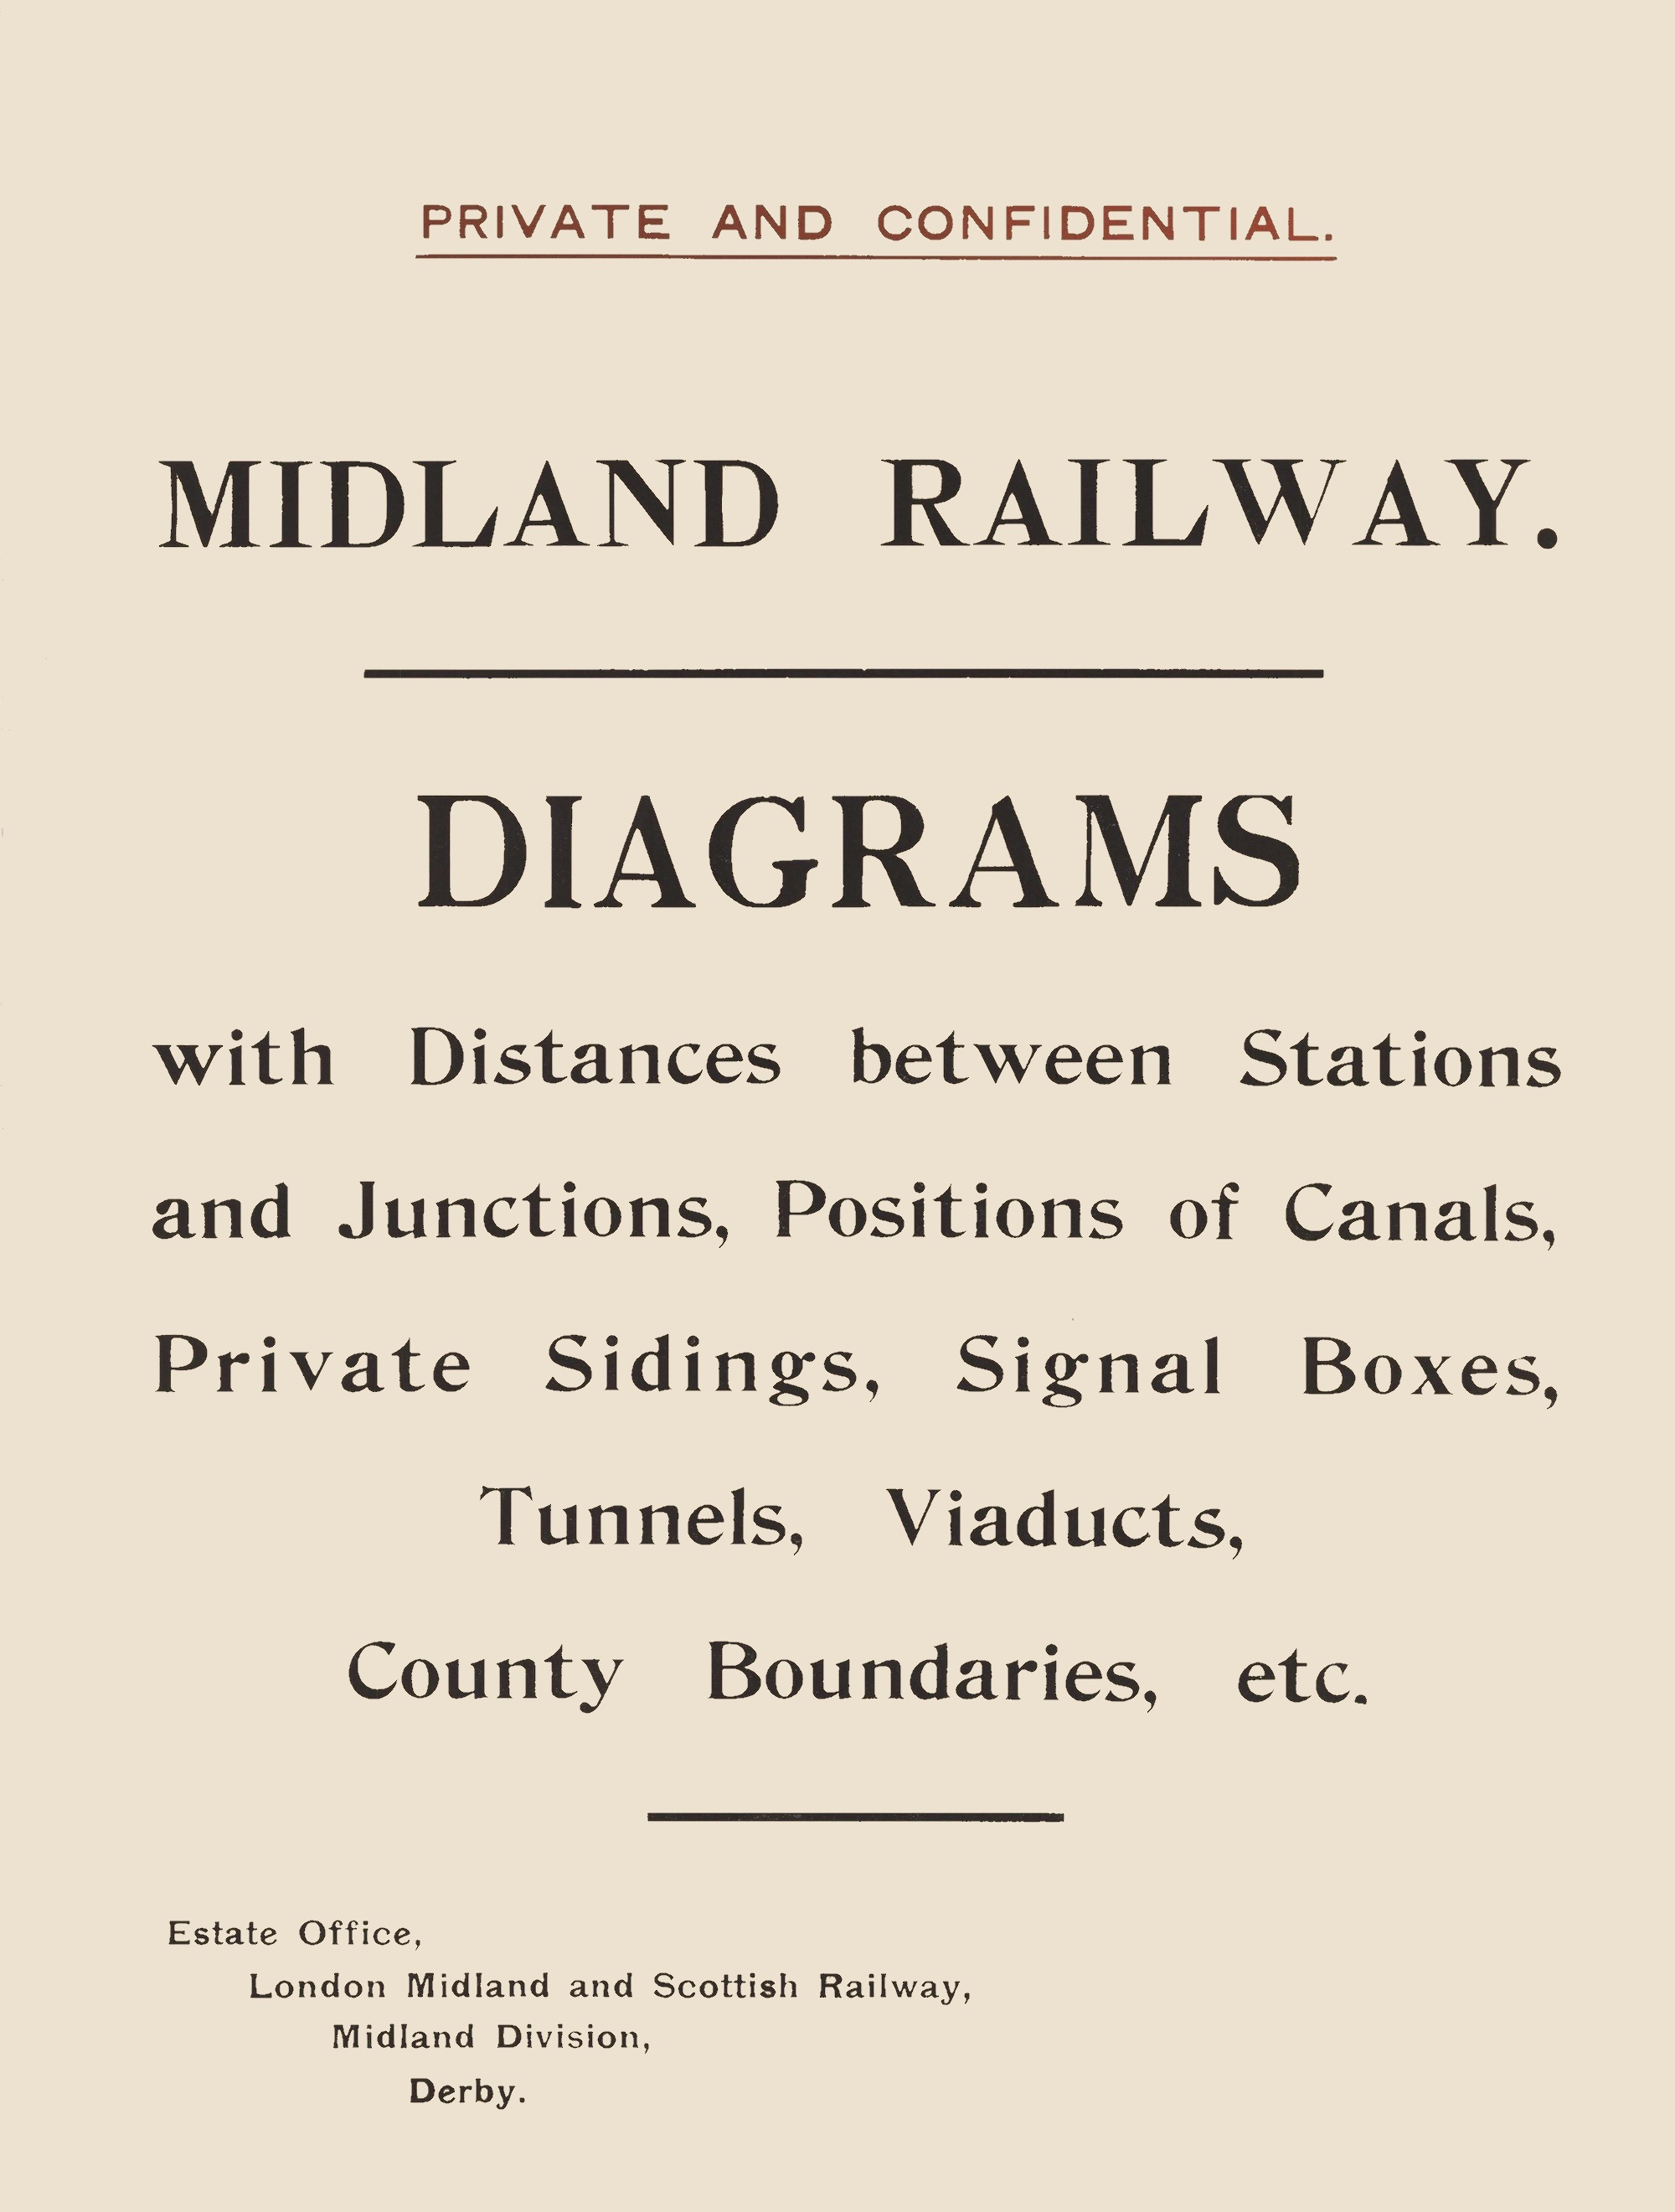 The cover sheet to the Midland Railway Distance Diagrams. Spread over multile lines, it reads; PRIVATE AND CONFIDENTIAL. MIDLAND RAILWAY. DIAGRAMS with Distances between Stations and Junctions, Positions of Canals, Private Sidings, Signal Boxes, Tunnels, Viaducts, County Boundaries, etc. Estate Office, London Midland and Scottish Railway, Midland Division, Derby.